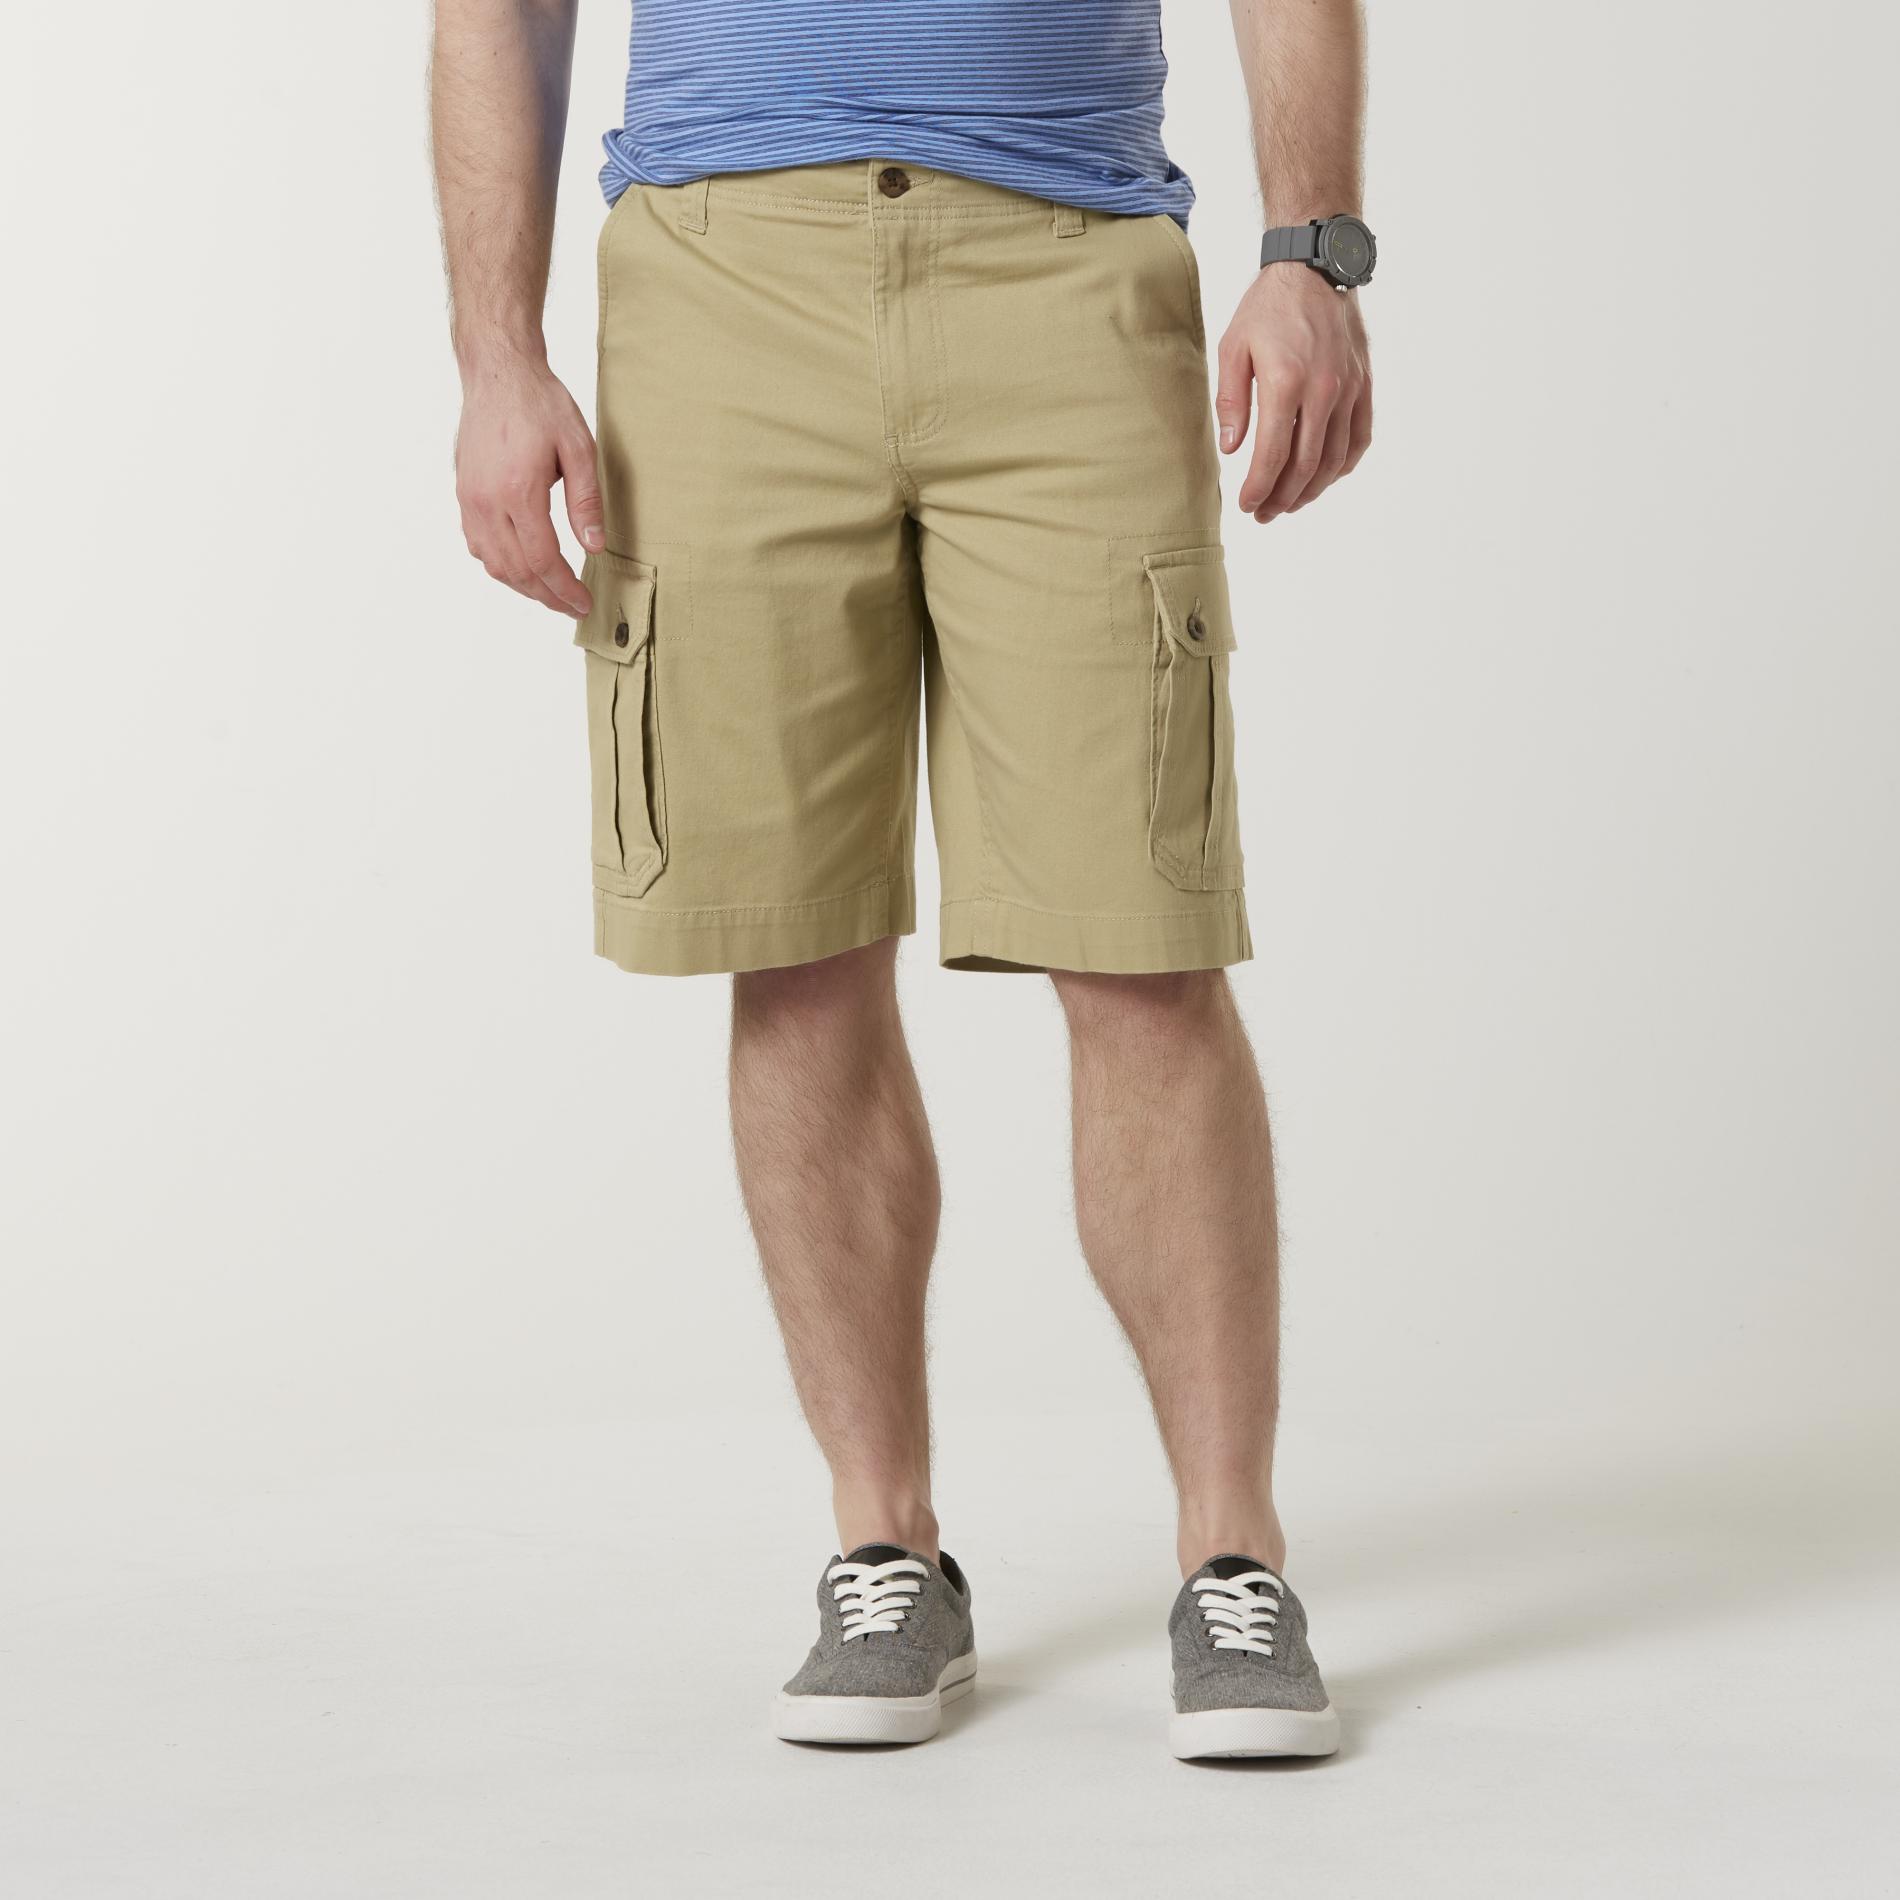 Roebuck And Co Men S Cargo Shorts Shop Your Way Online Shopping And Earn Points On Tools